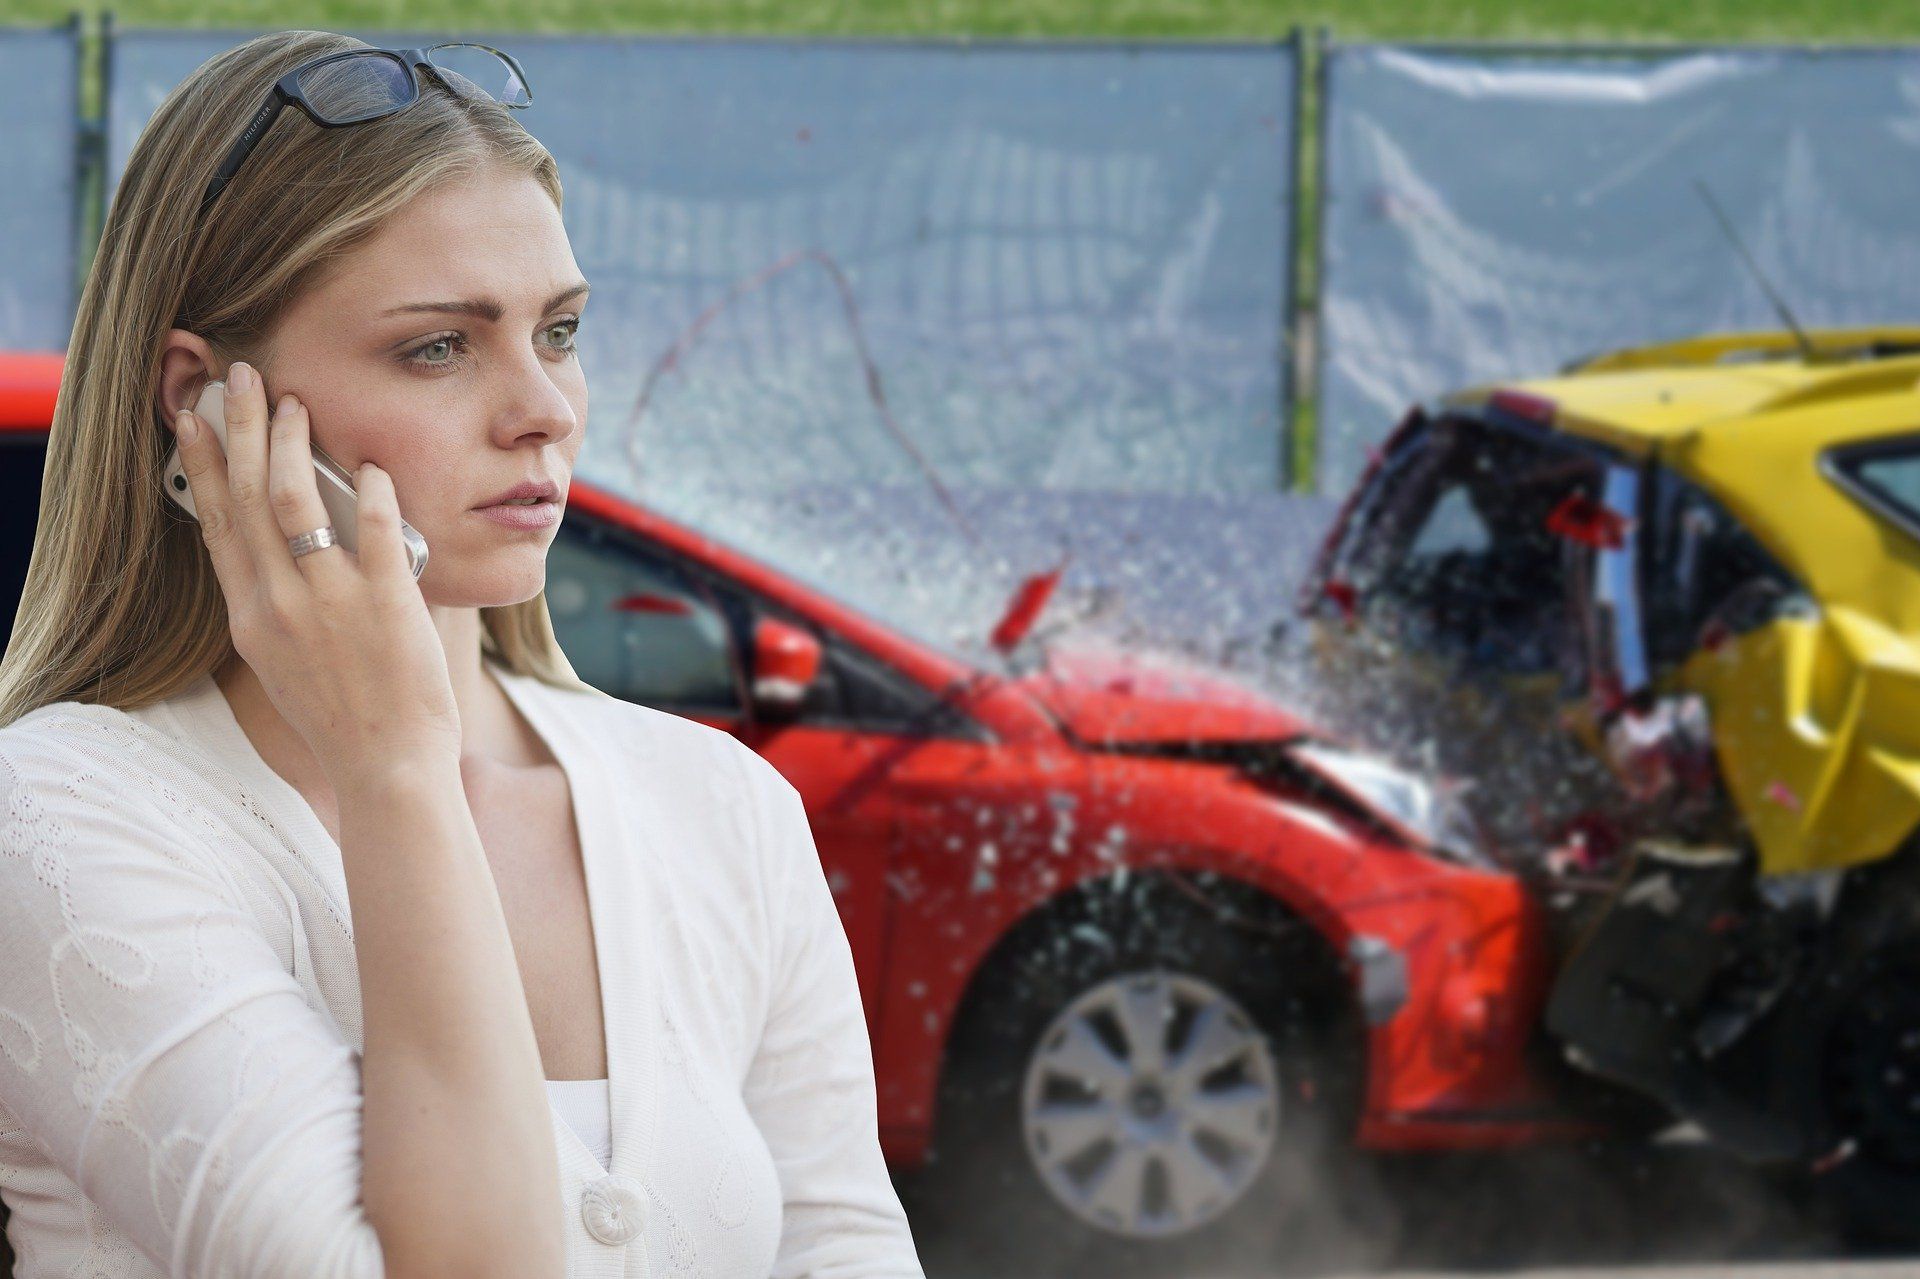 Women phoning for assistance after an accident